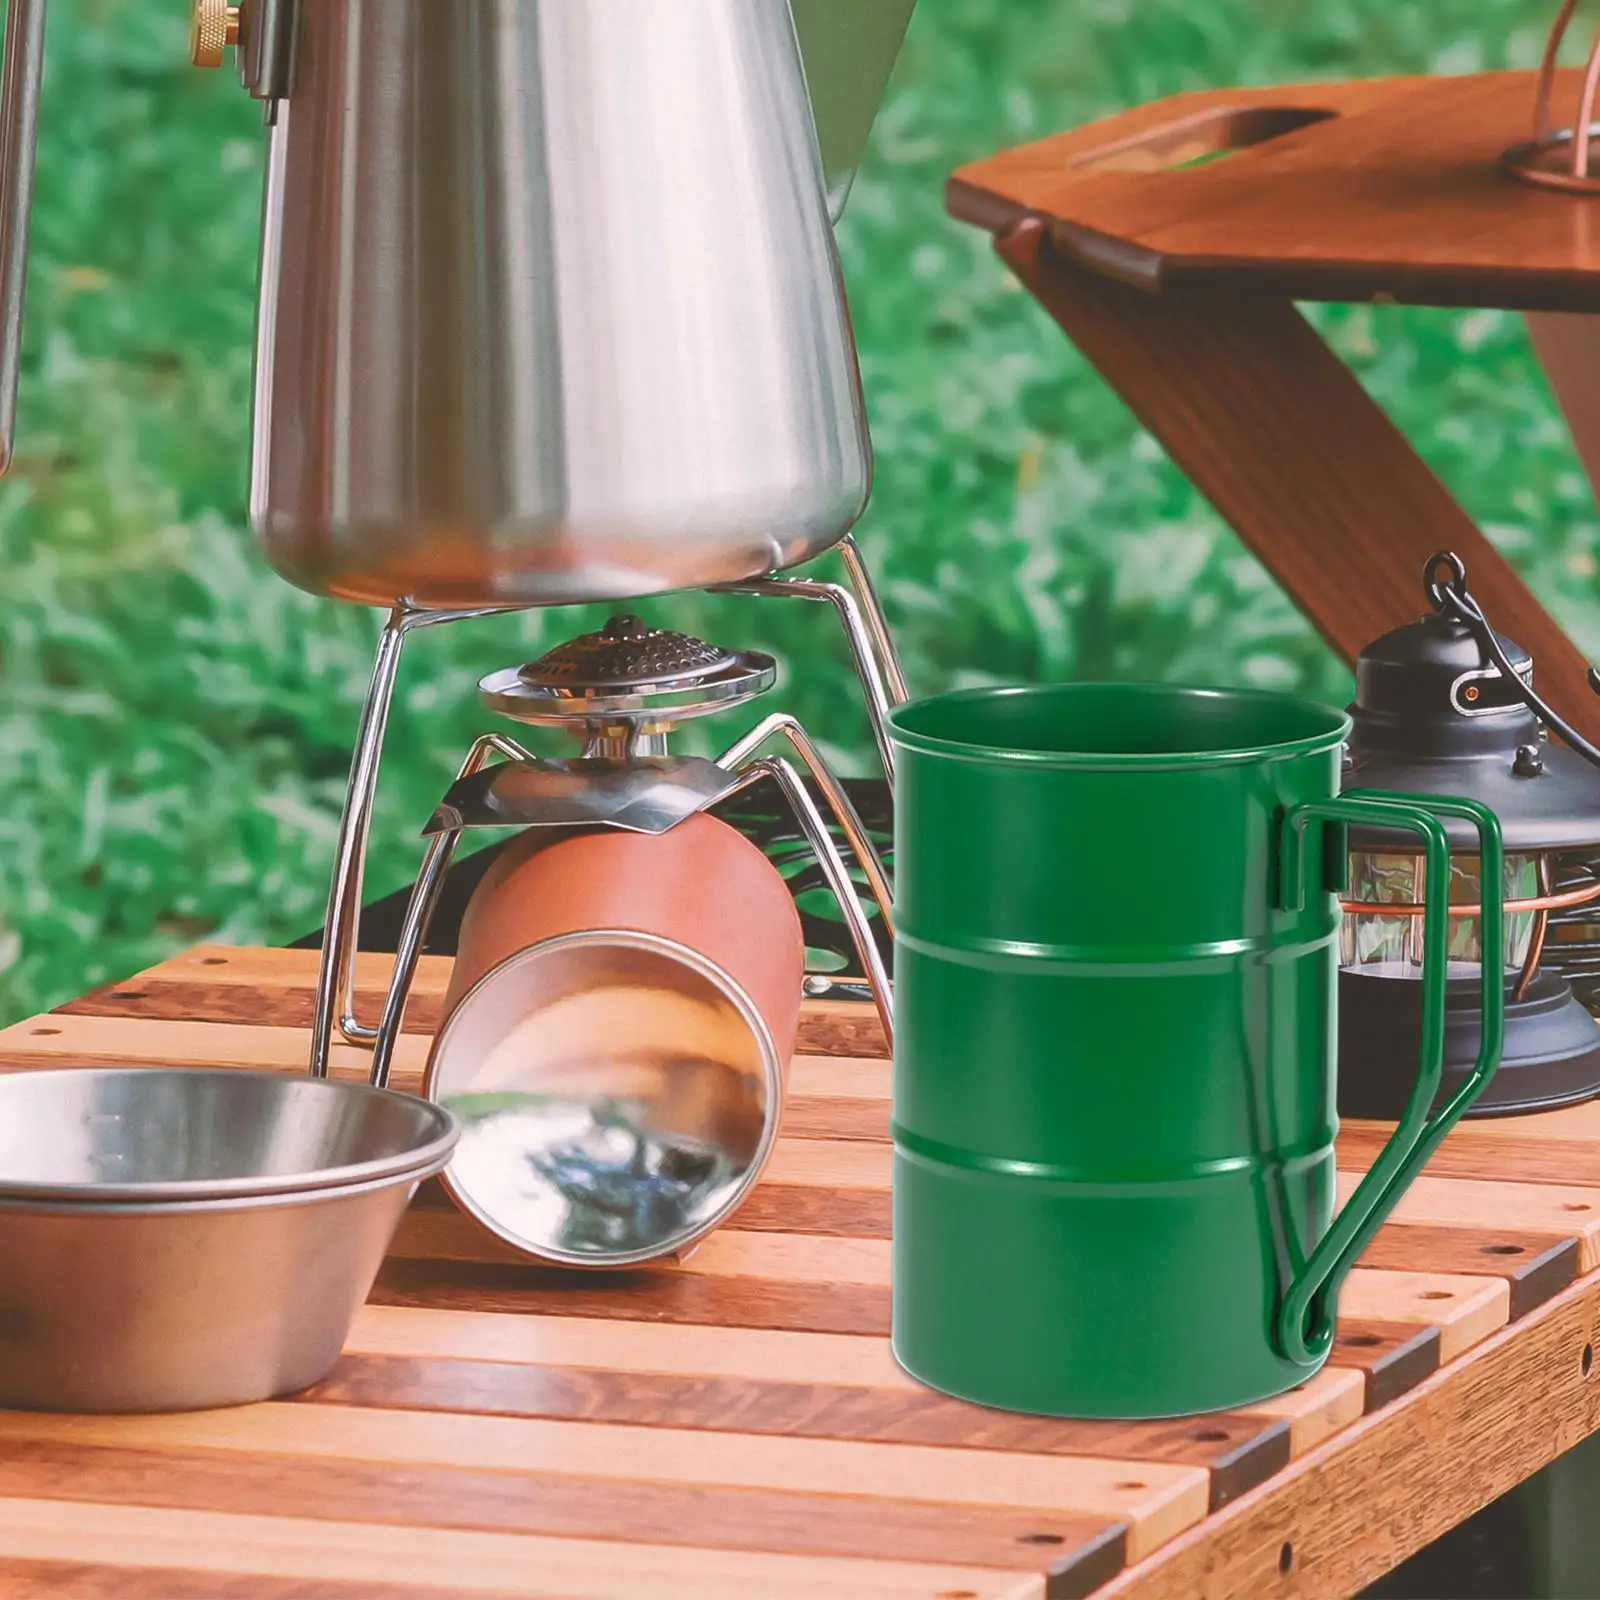 Stainless Steel Camping Mug Cooking Pot Reusable Coffee Cup Gift Vintage Style